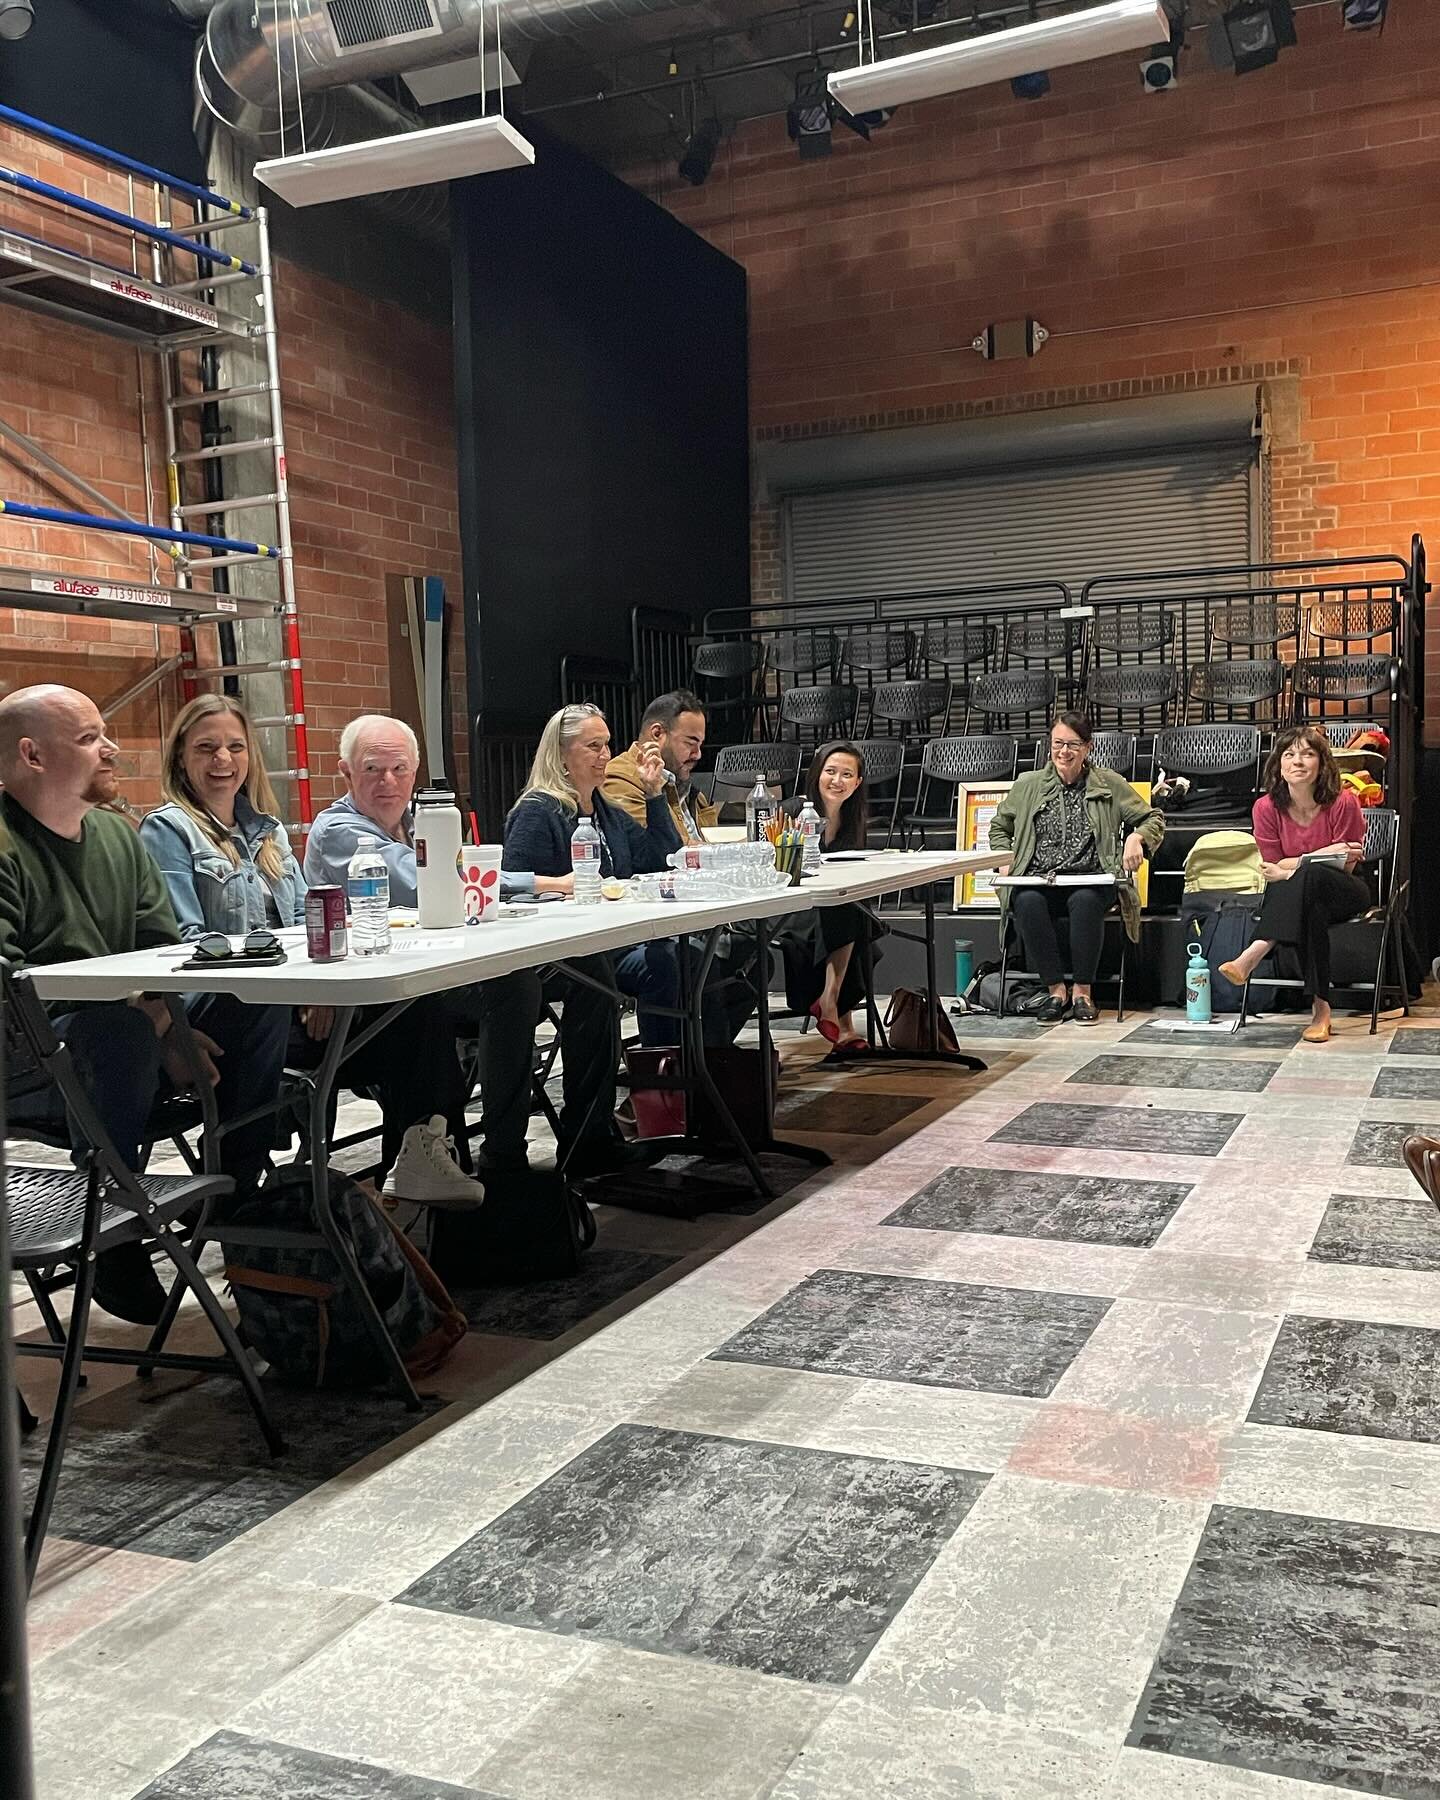 THE FATHER rehearsals have begun! The room was buzzing with excitement during our public table read yesterday.

We hope you can join us!

THE FATHER by Florian Zeller
Directed by Elizabeth Bunch
April 26 - May 11

#houstontheatre #houston #theater #f